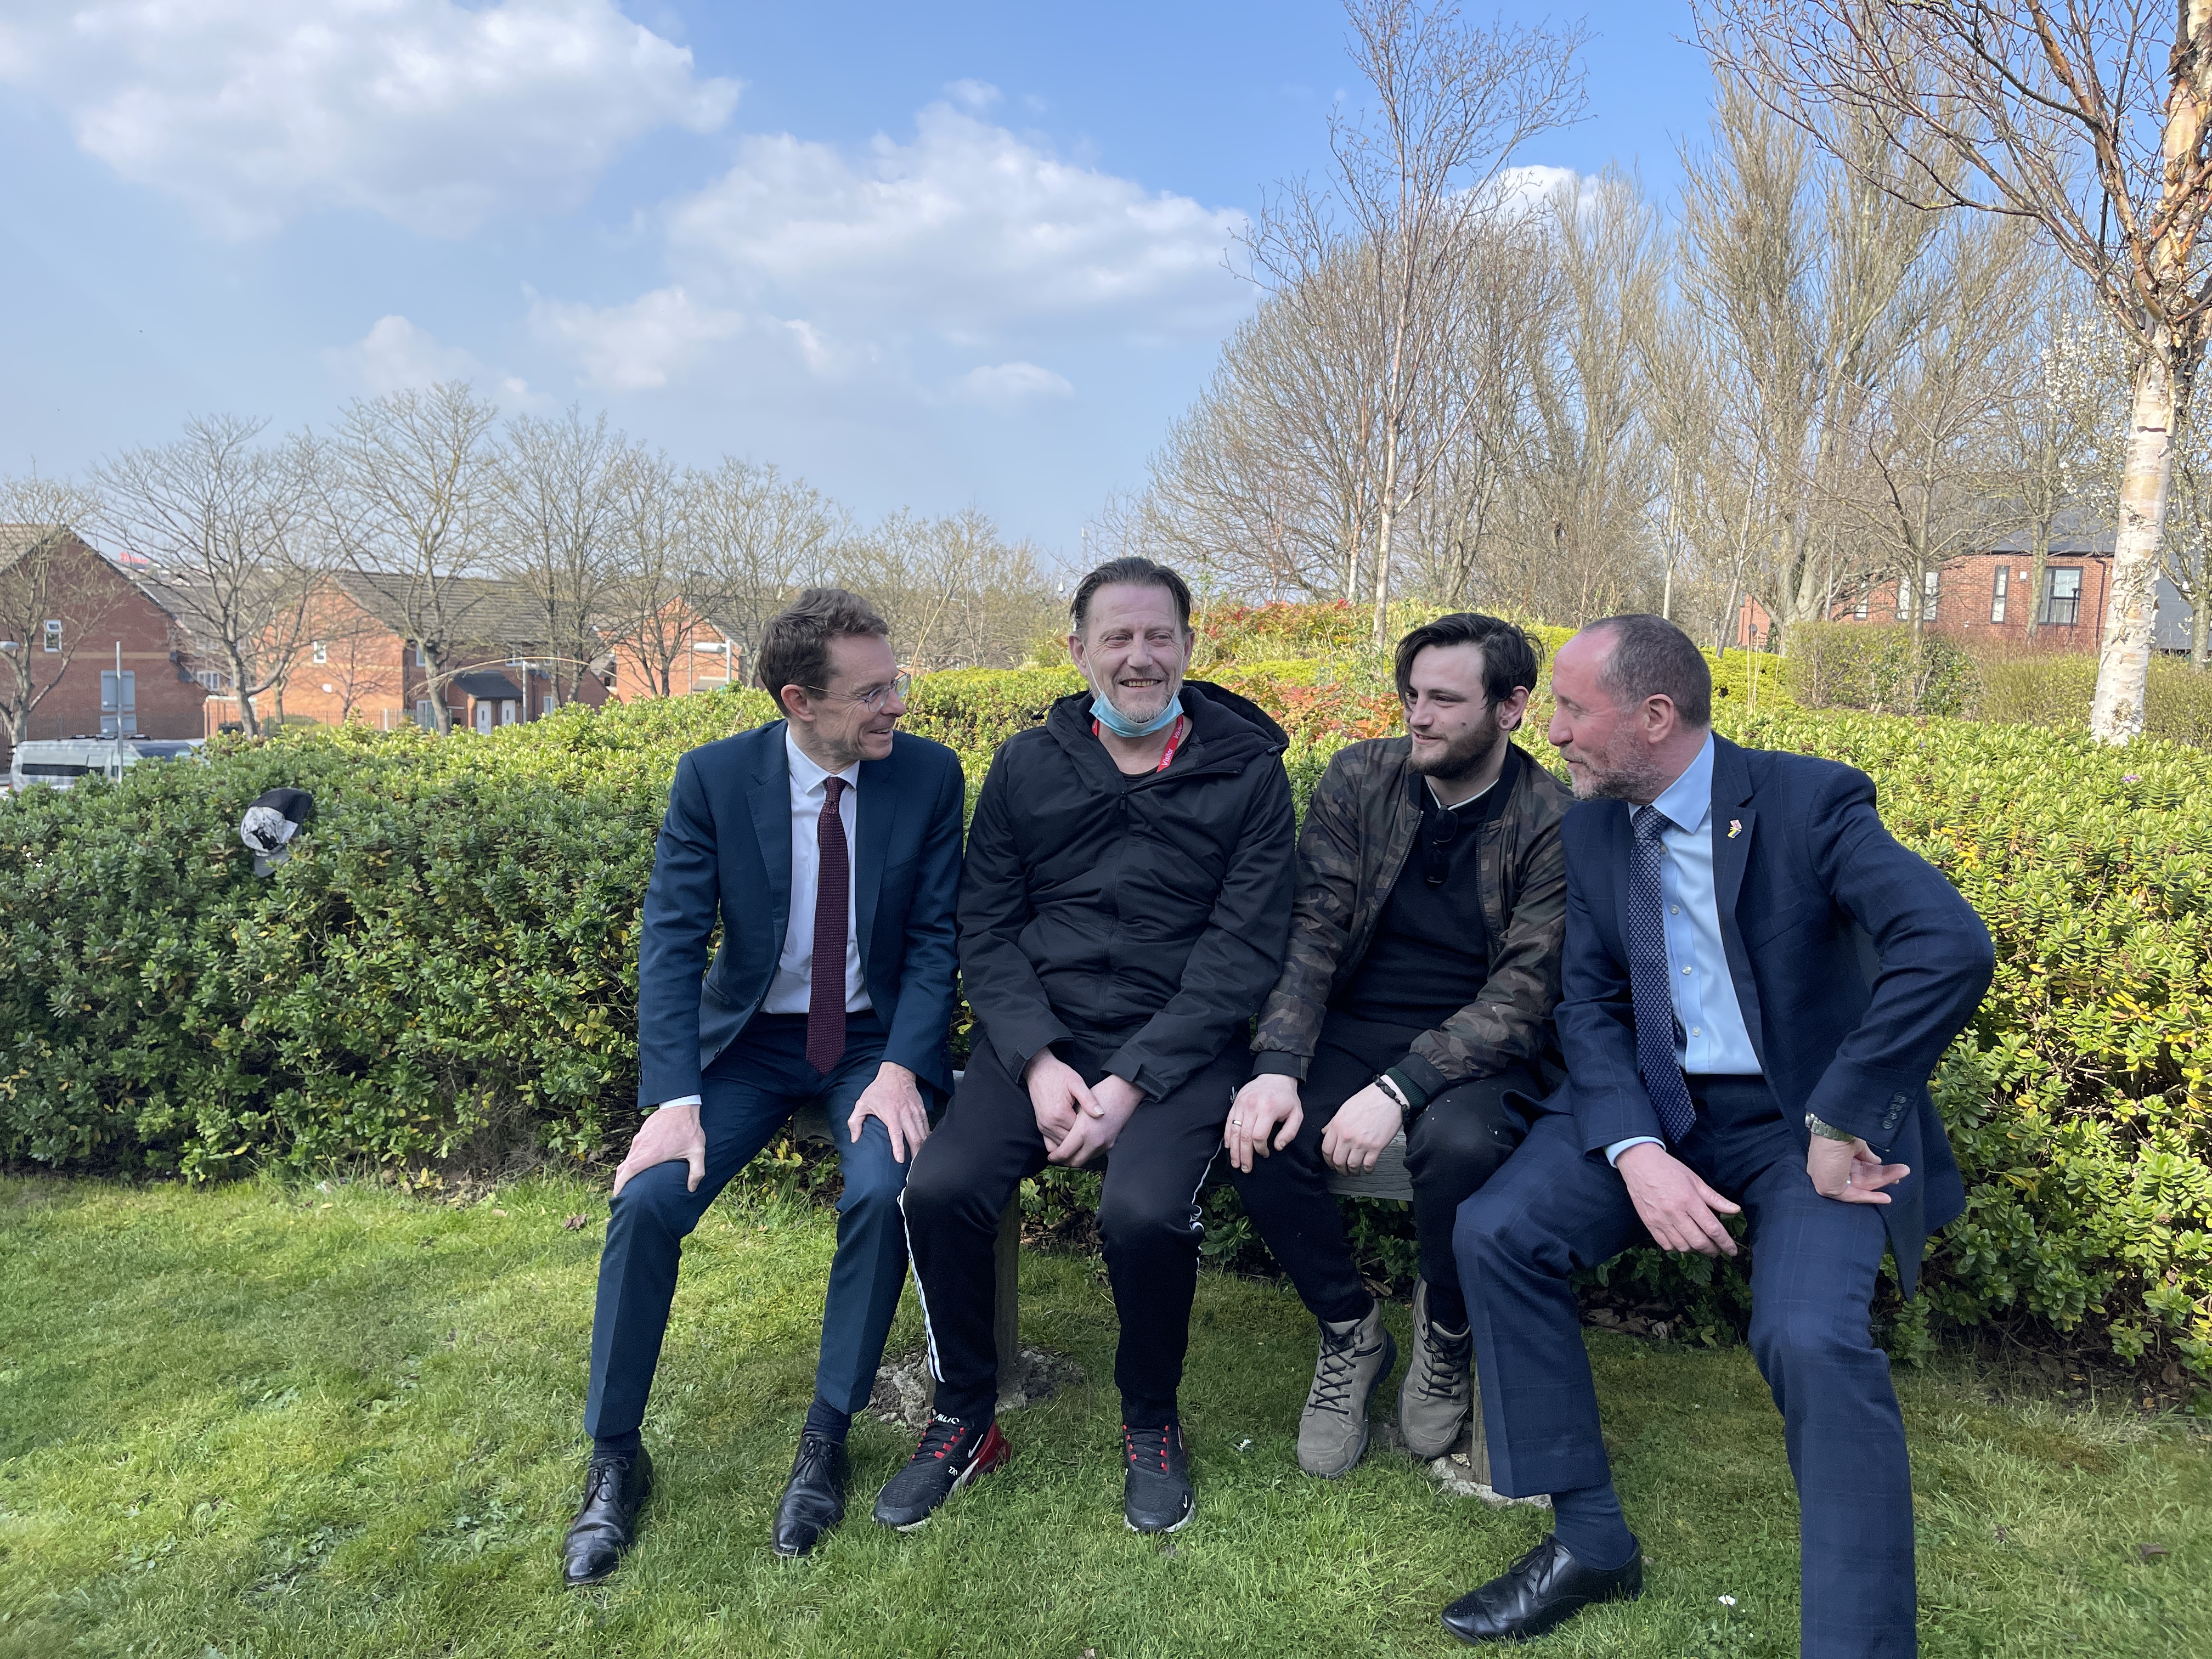 From left: Andy Street, Mayor of the West Midlands, Housing First clients Martin and Ryan and Minister for Rough Sleeping and Housing, Eddie Hughes